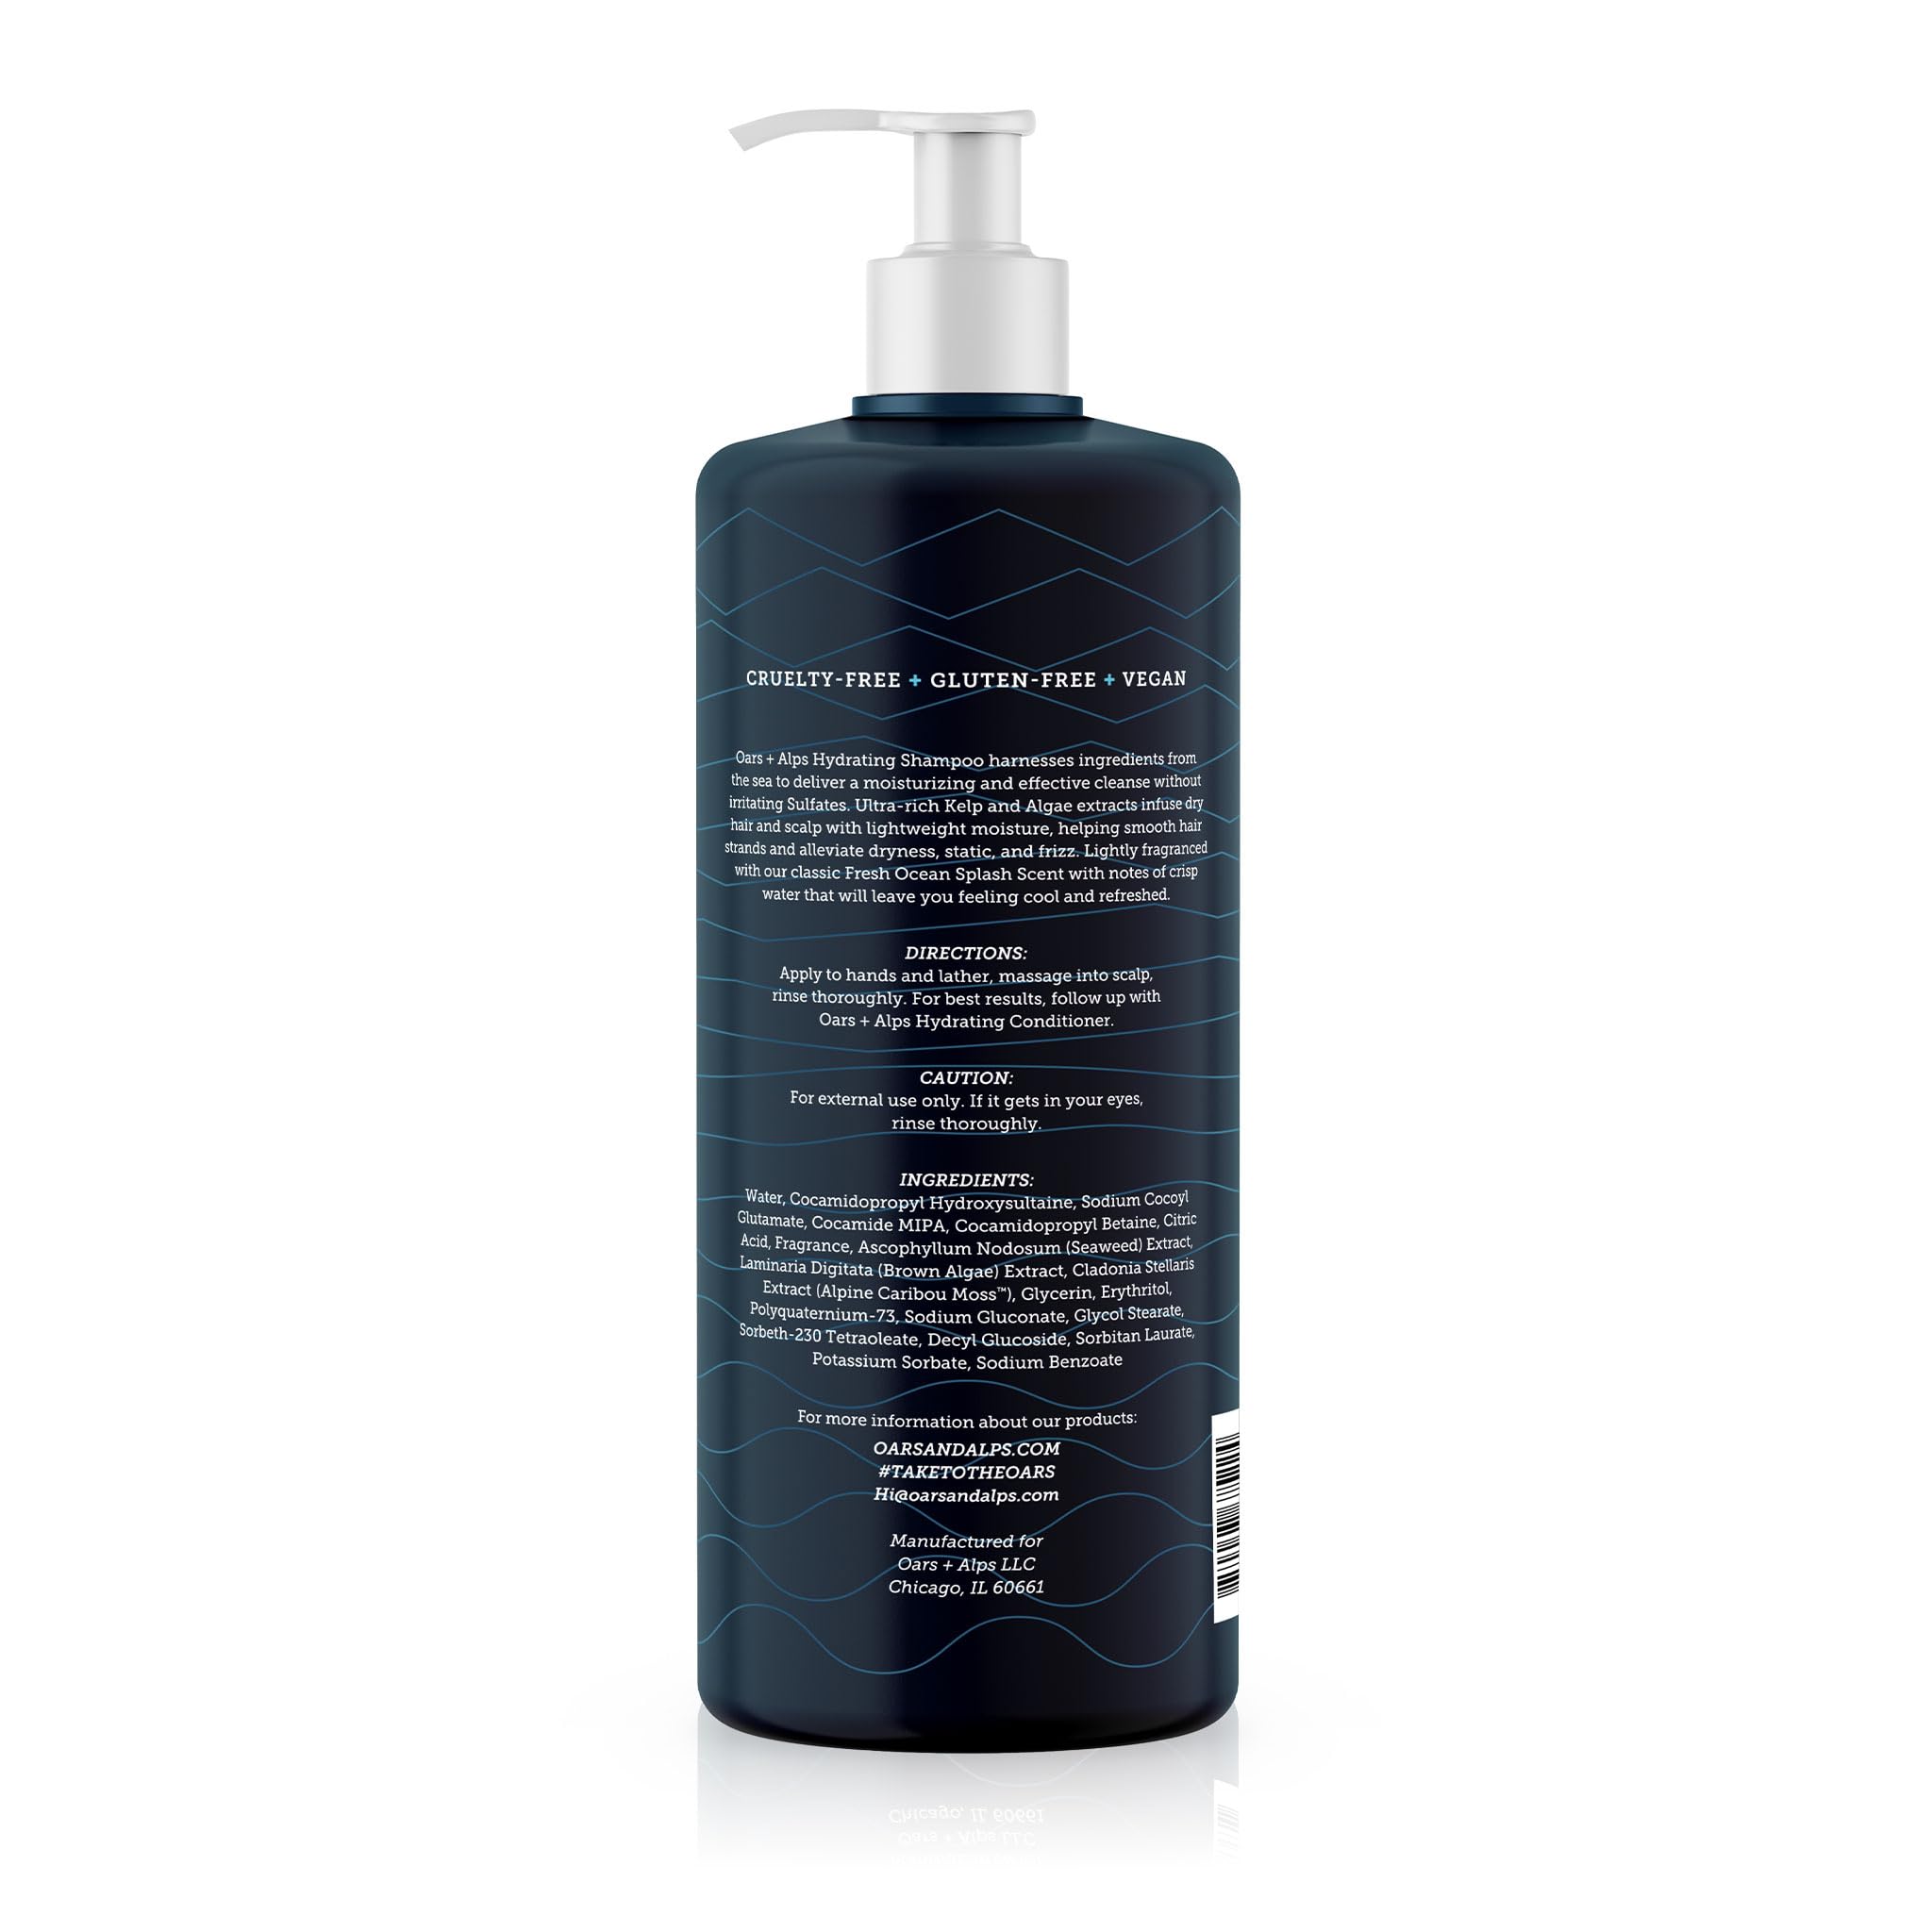 Oars + Alps Men's Sulfate Free Shampoo, Infused with Kelp and Algae Extracts, Fresh Ocean Splash, 32oz